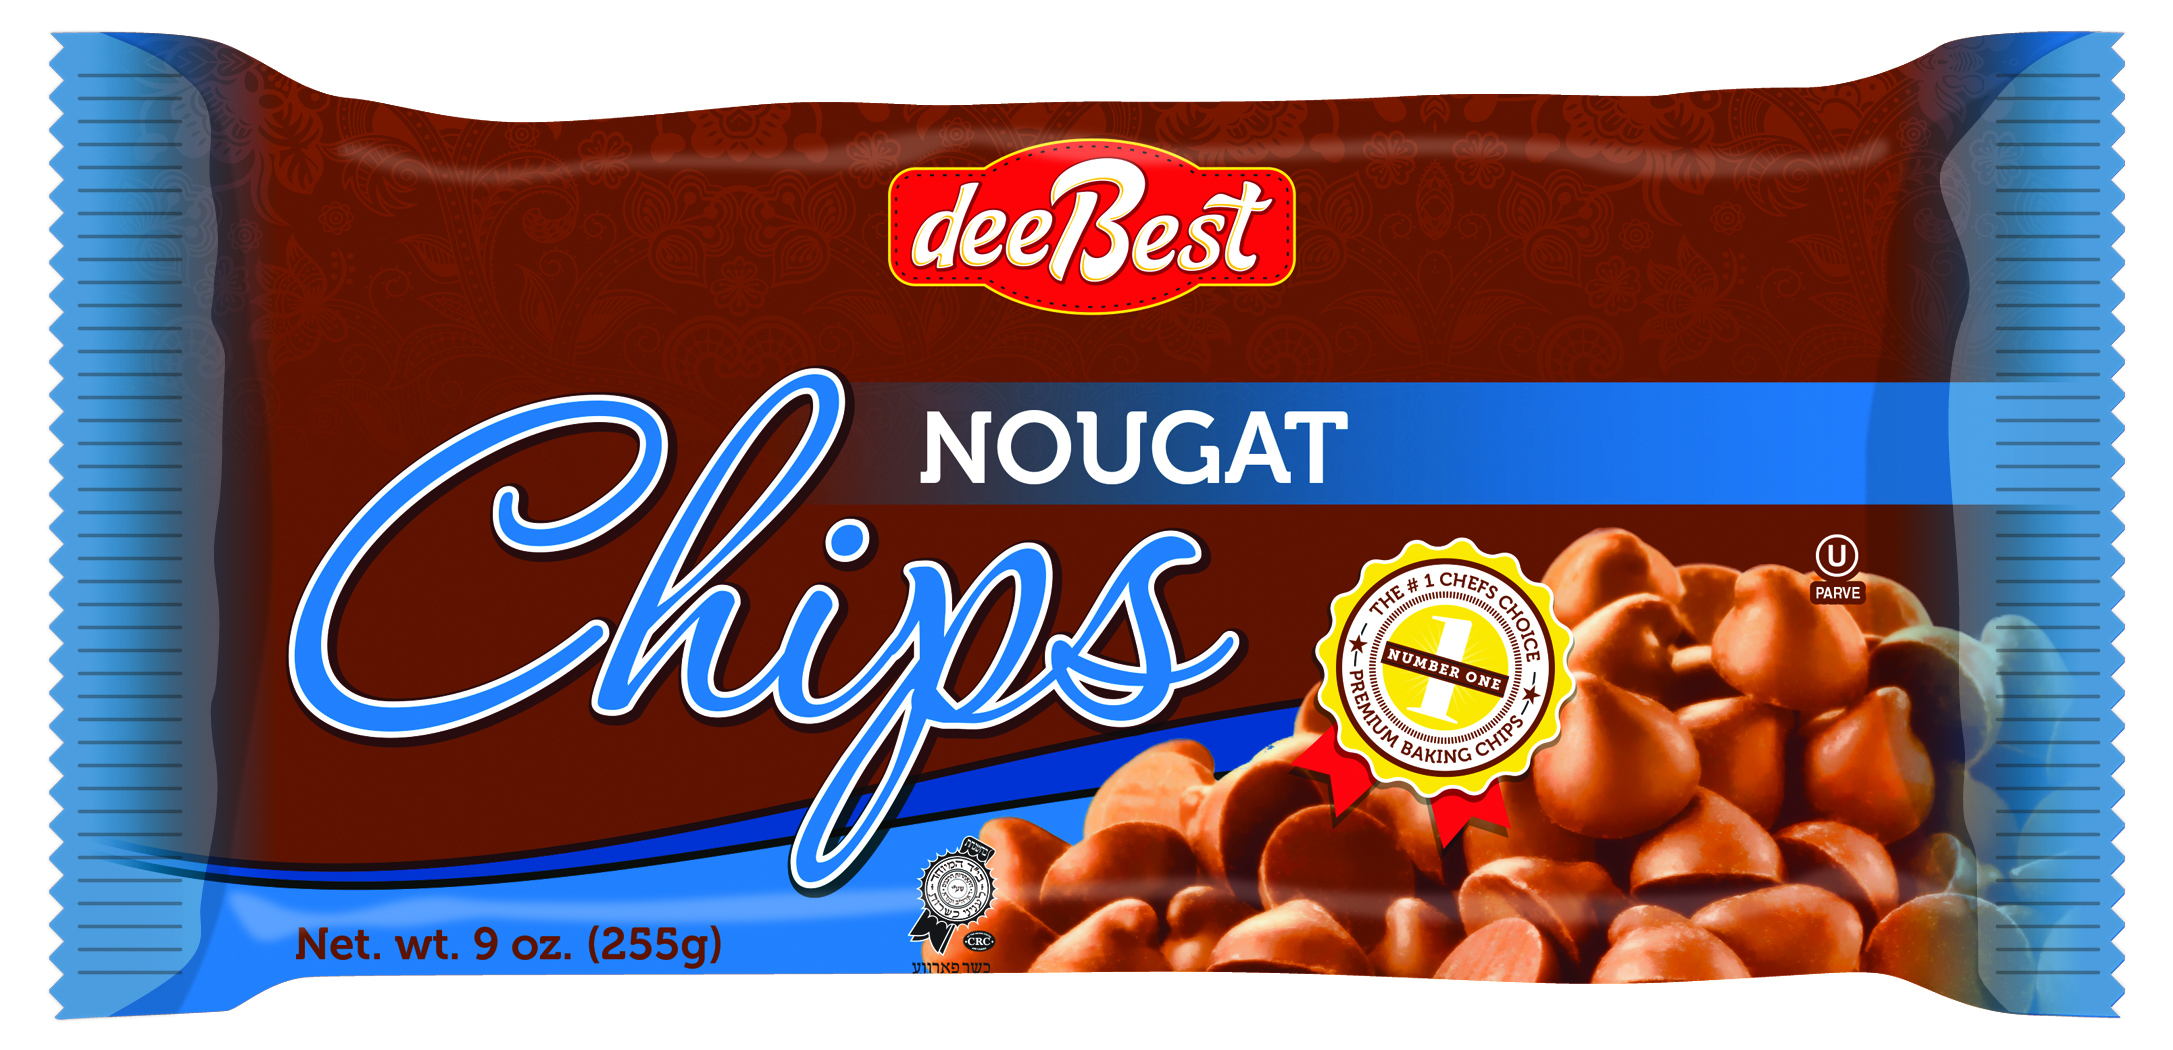 DEE BEST NOUGAT CHOCOLATE CHIPS